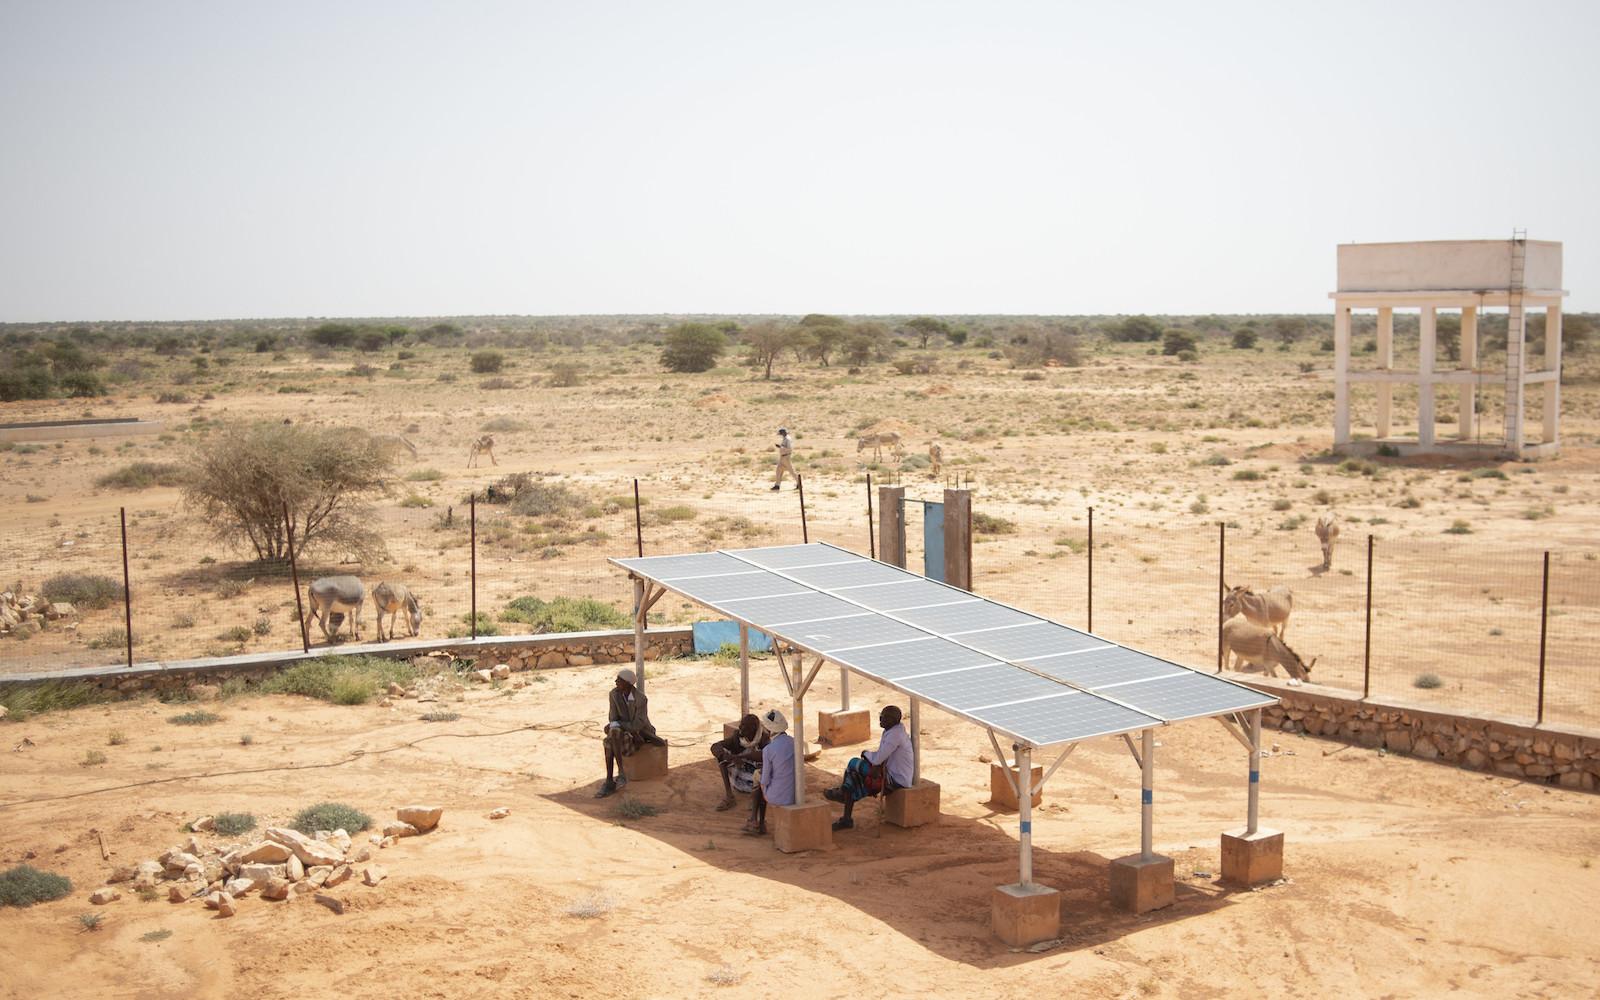 Local residents sit under an array of solar panels used to help pump water from the dam in Shaxda village, Puntland